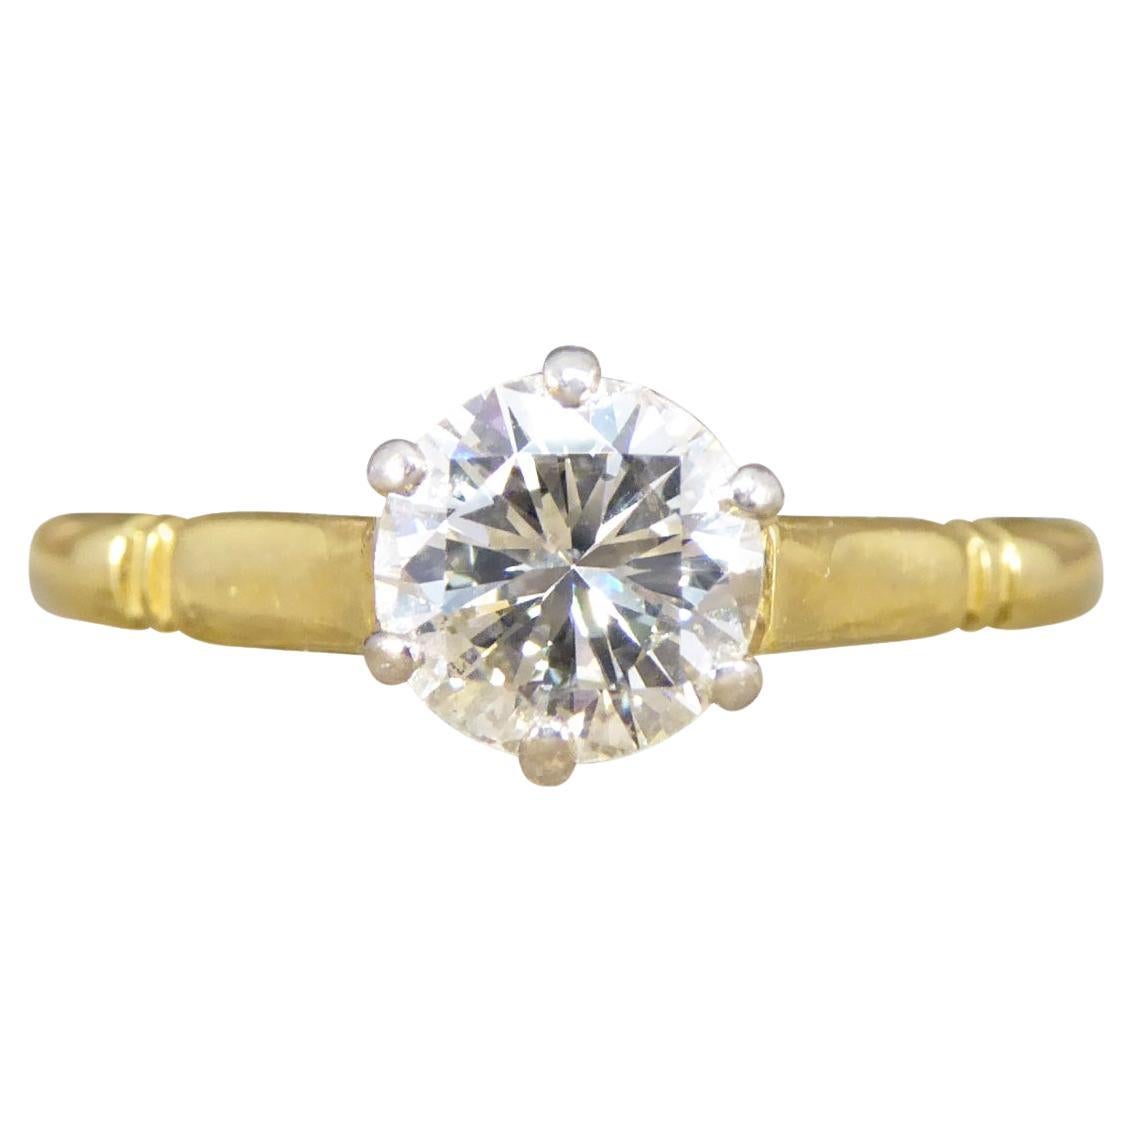 Vintage 0,82ct Diamond Solitaire Ring in 18ct Gelbgold